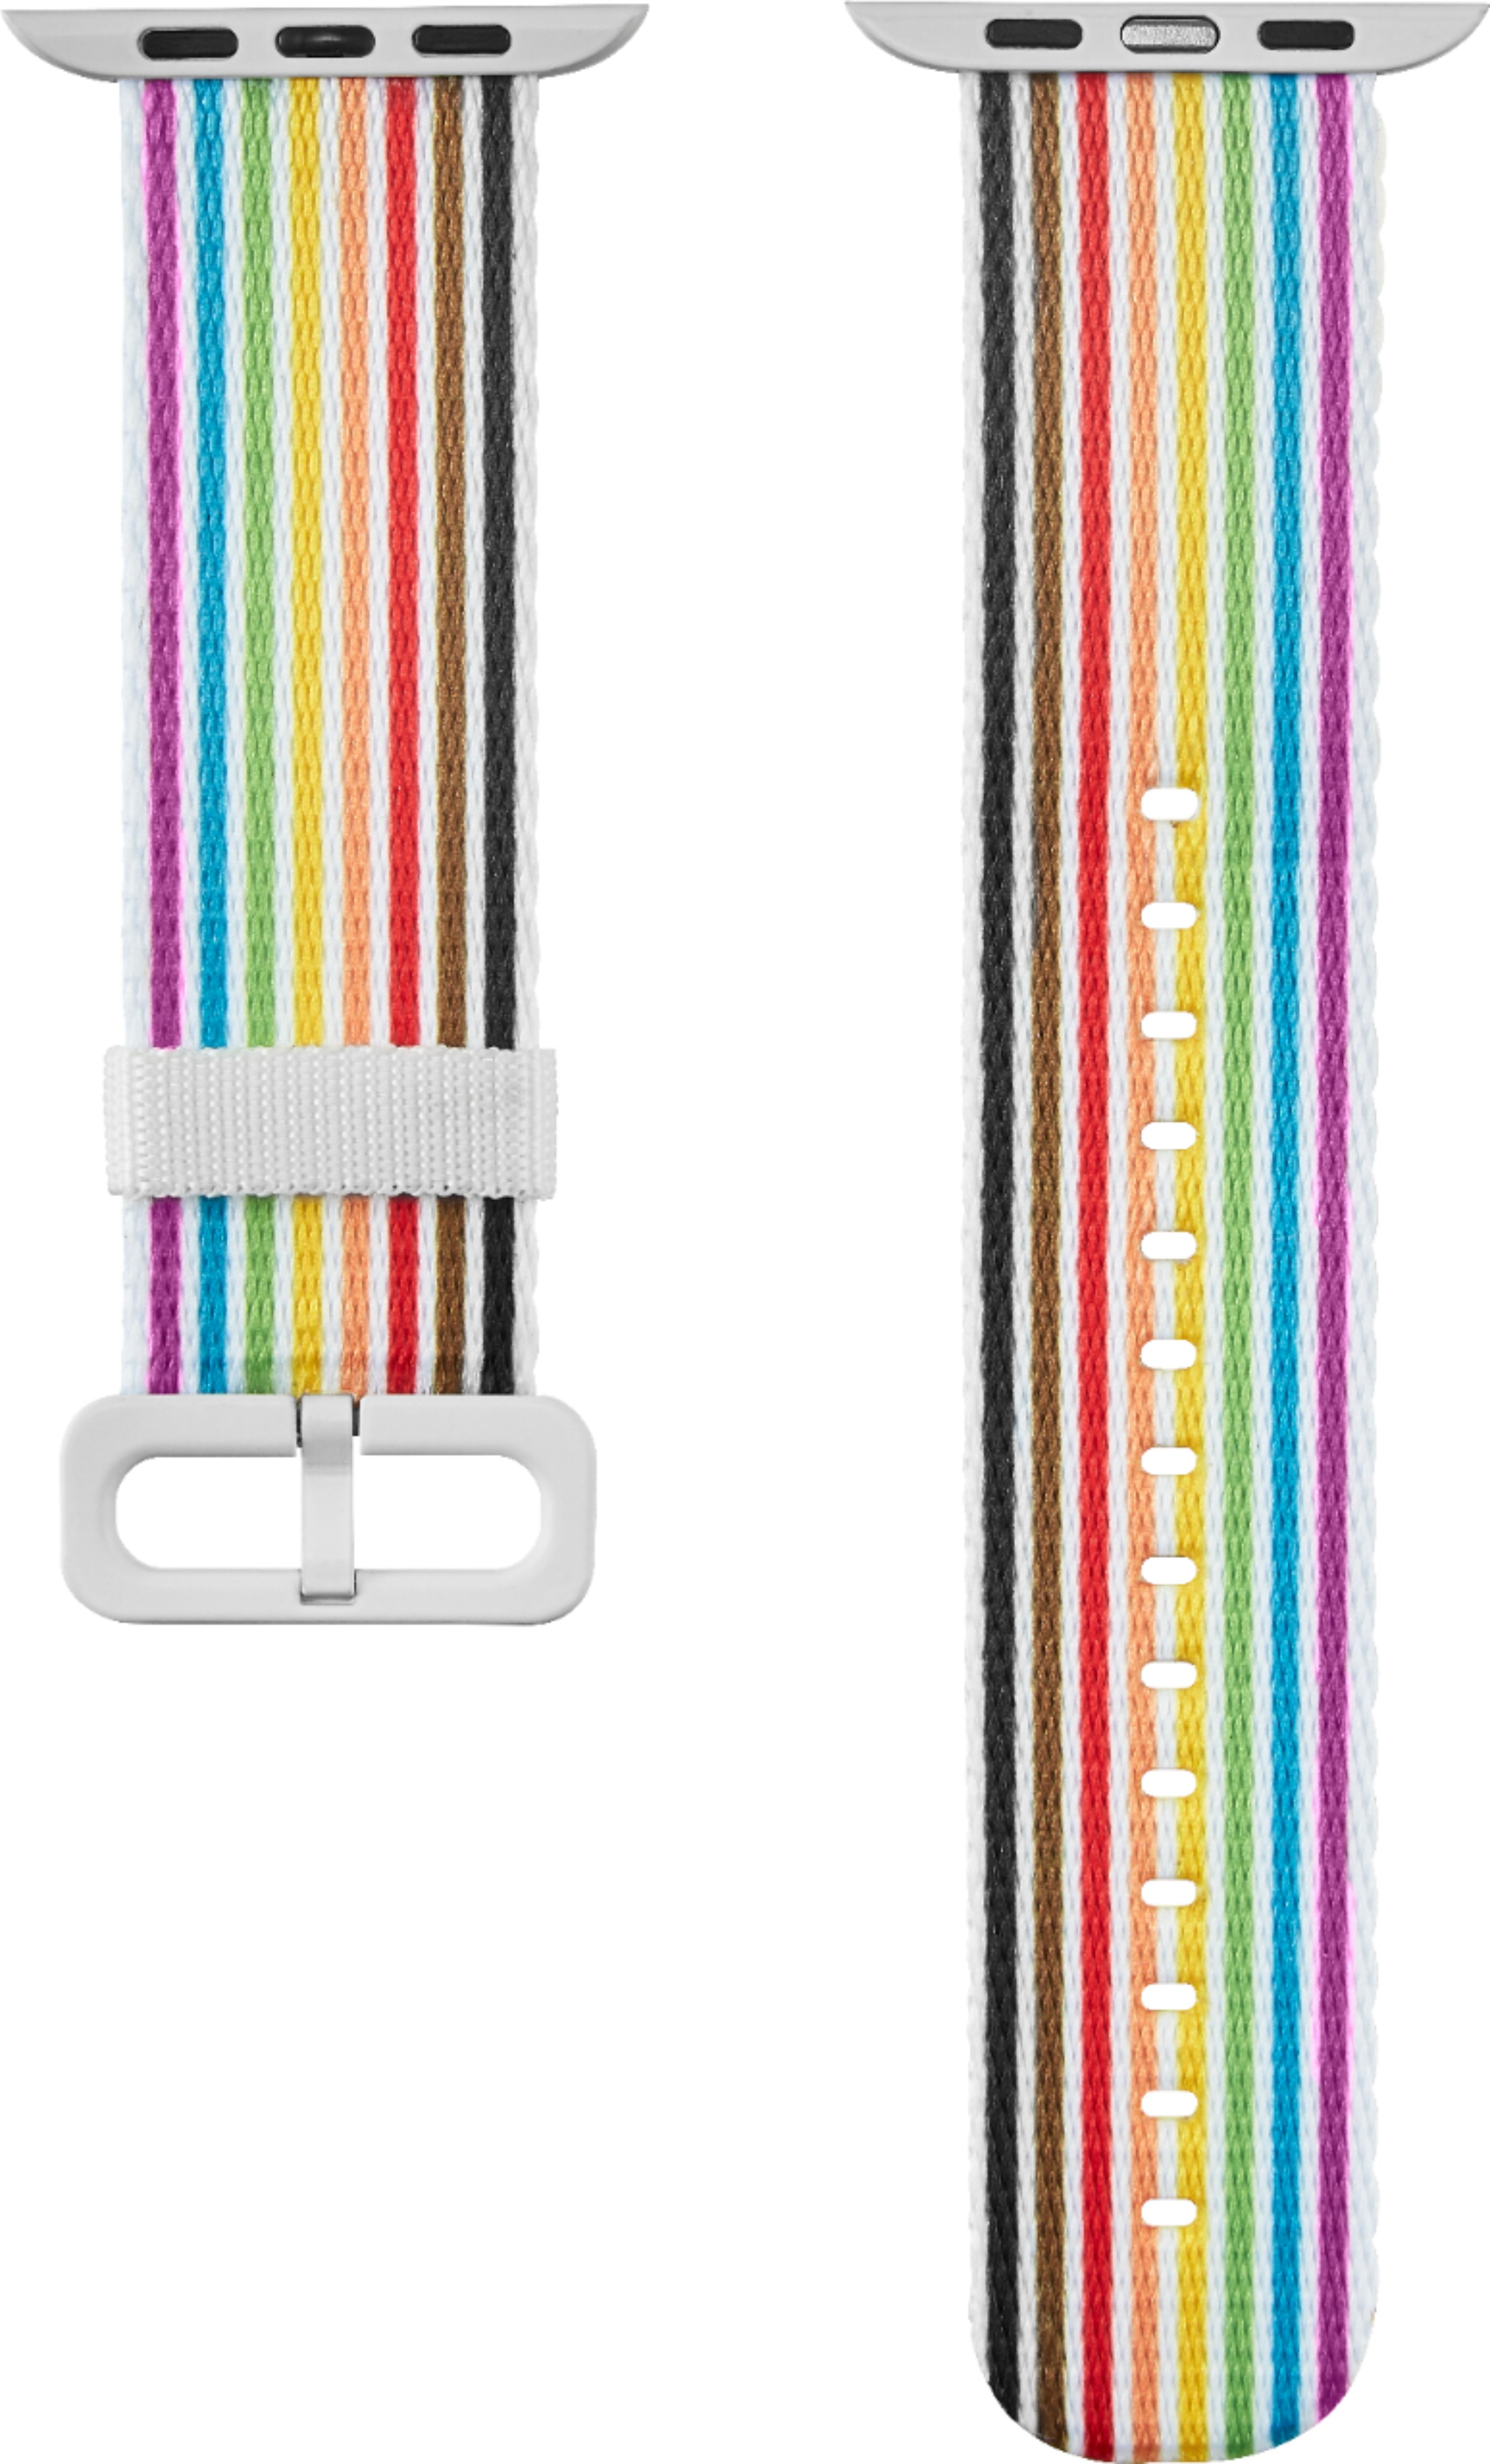 Angle View: Modal™ - Pride Edition Woven Nylon Band for Apple Watch 42mm, 44mm, and 45mm - White/Pride Stripe